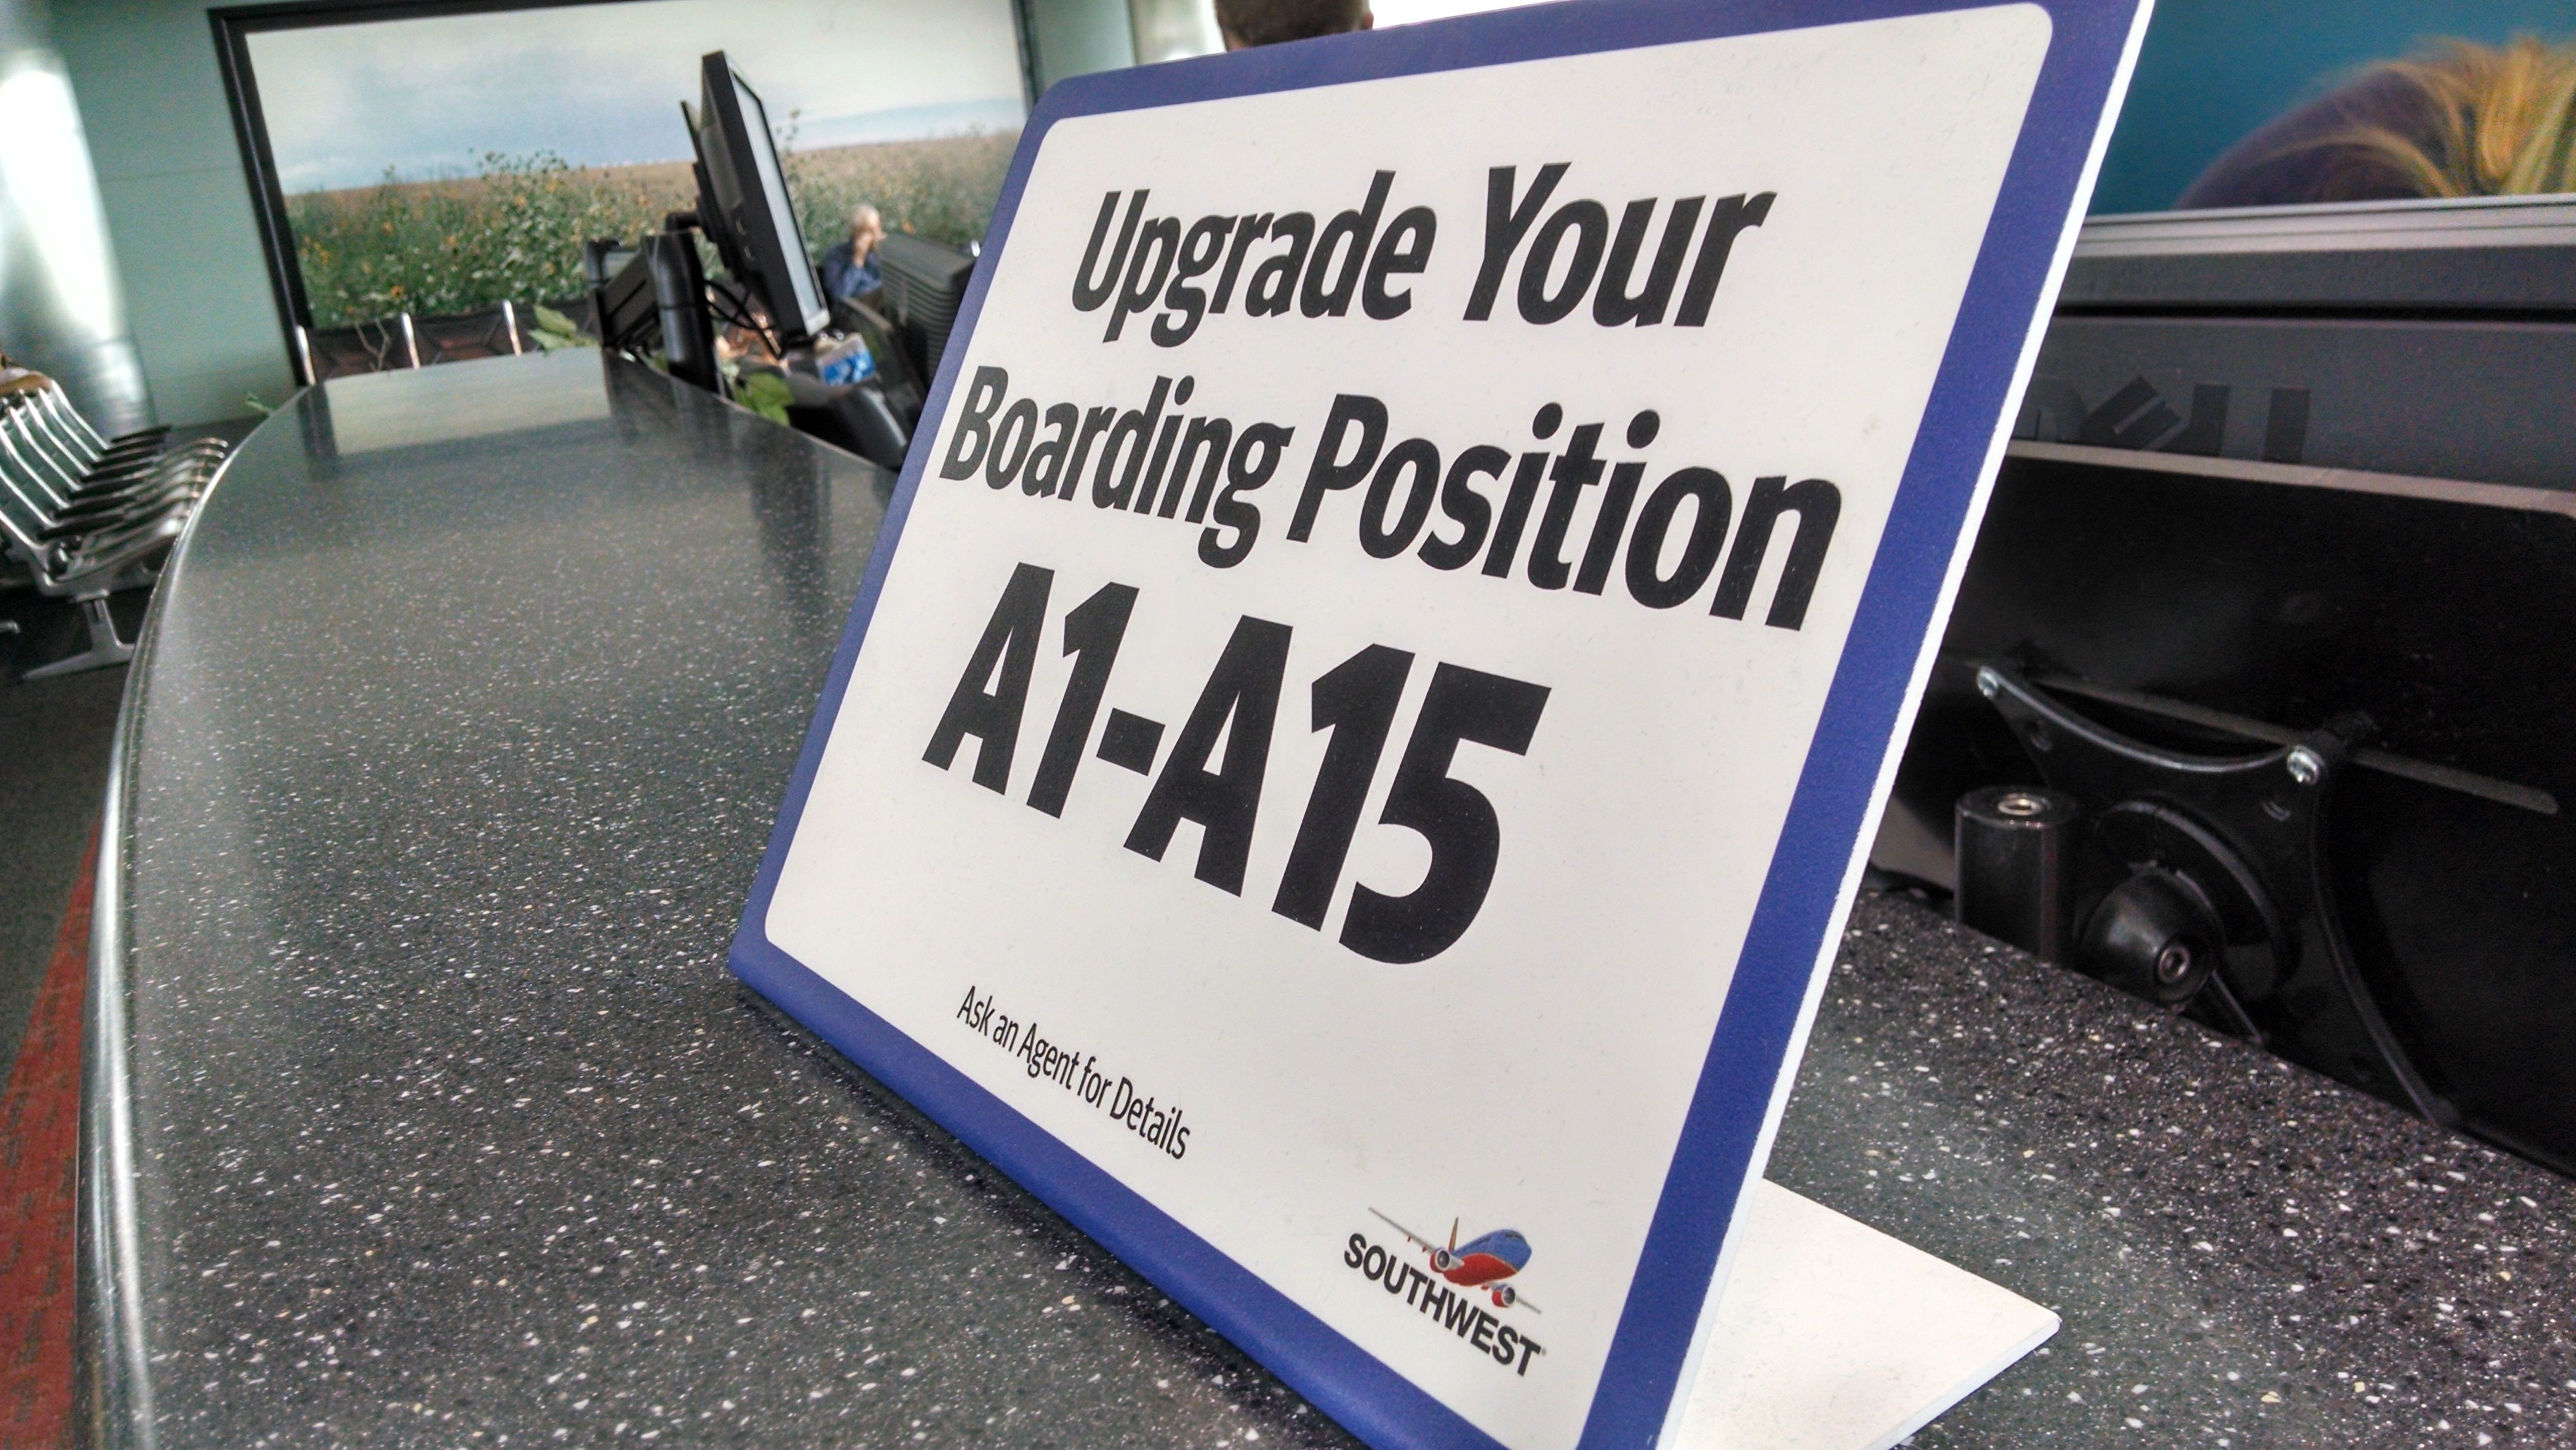 A Southwest Airlines boarding upgrade sign.